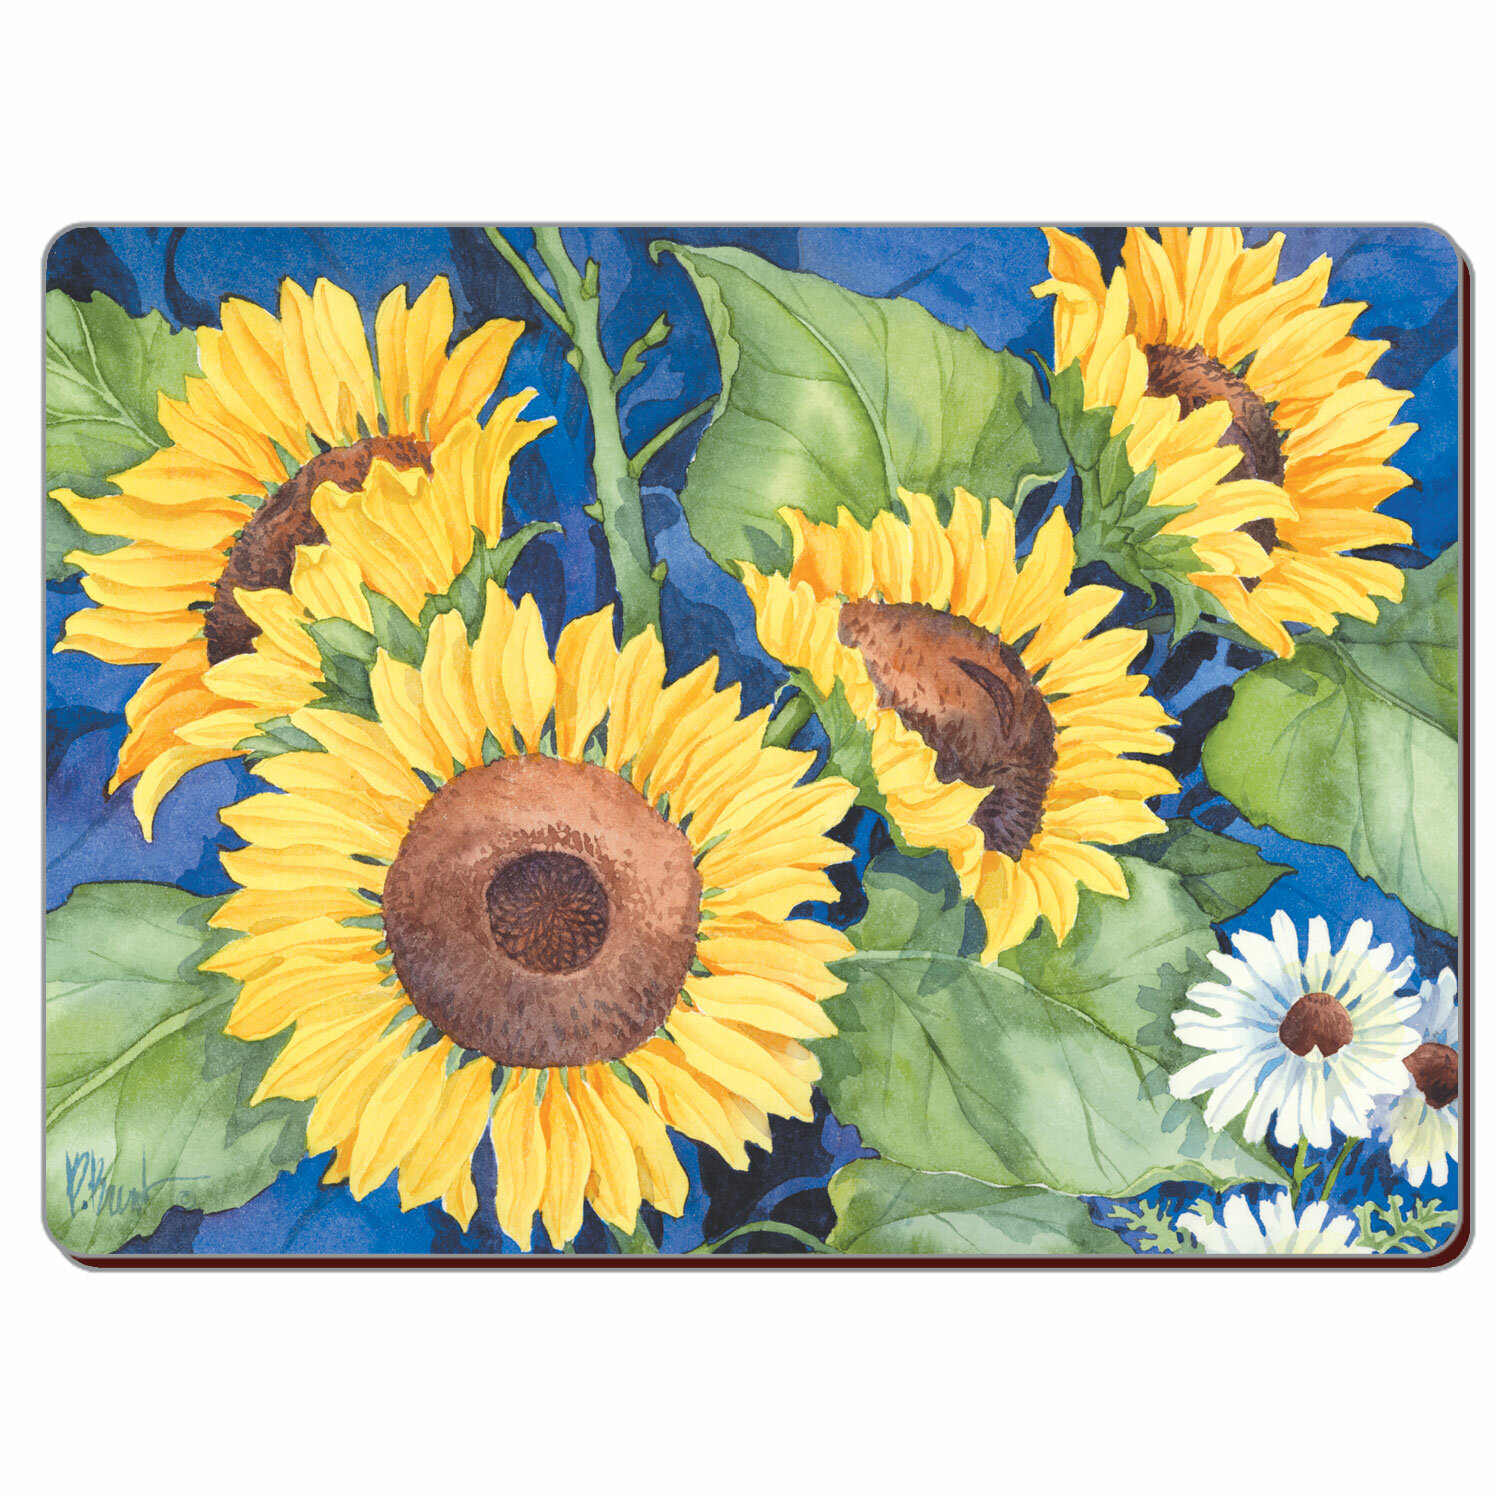 Ambesonne Aztec Place Mats Set of 4 Washable Fabric Placemats for Dining Room Kitchen Table Decor Floral Mandala Sunflowers Harvest Autumn Season Agriculture Rural Eco Pattern Orange Yellow